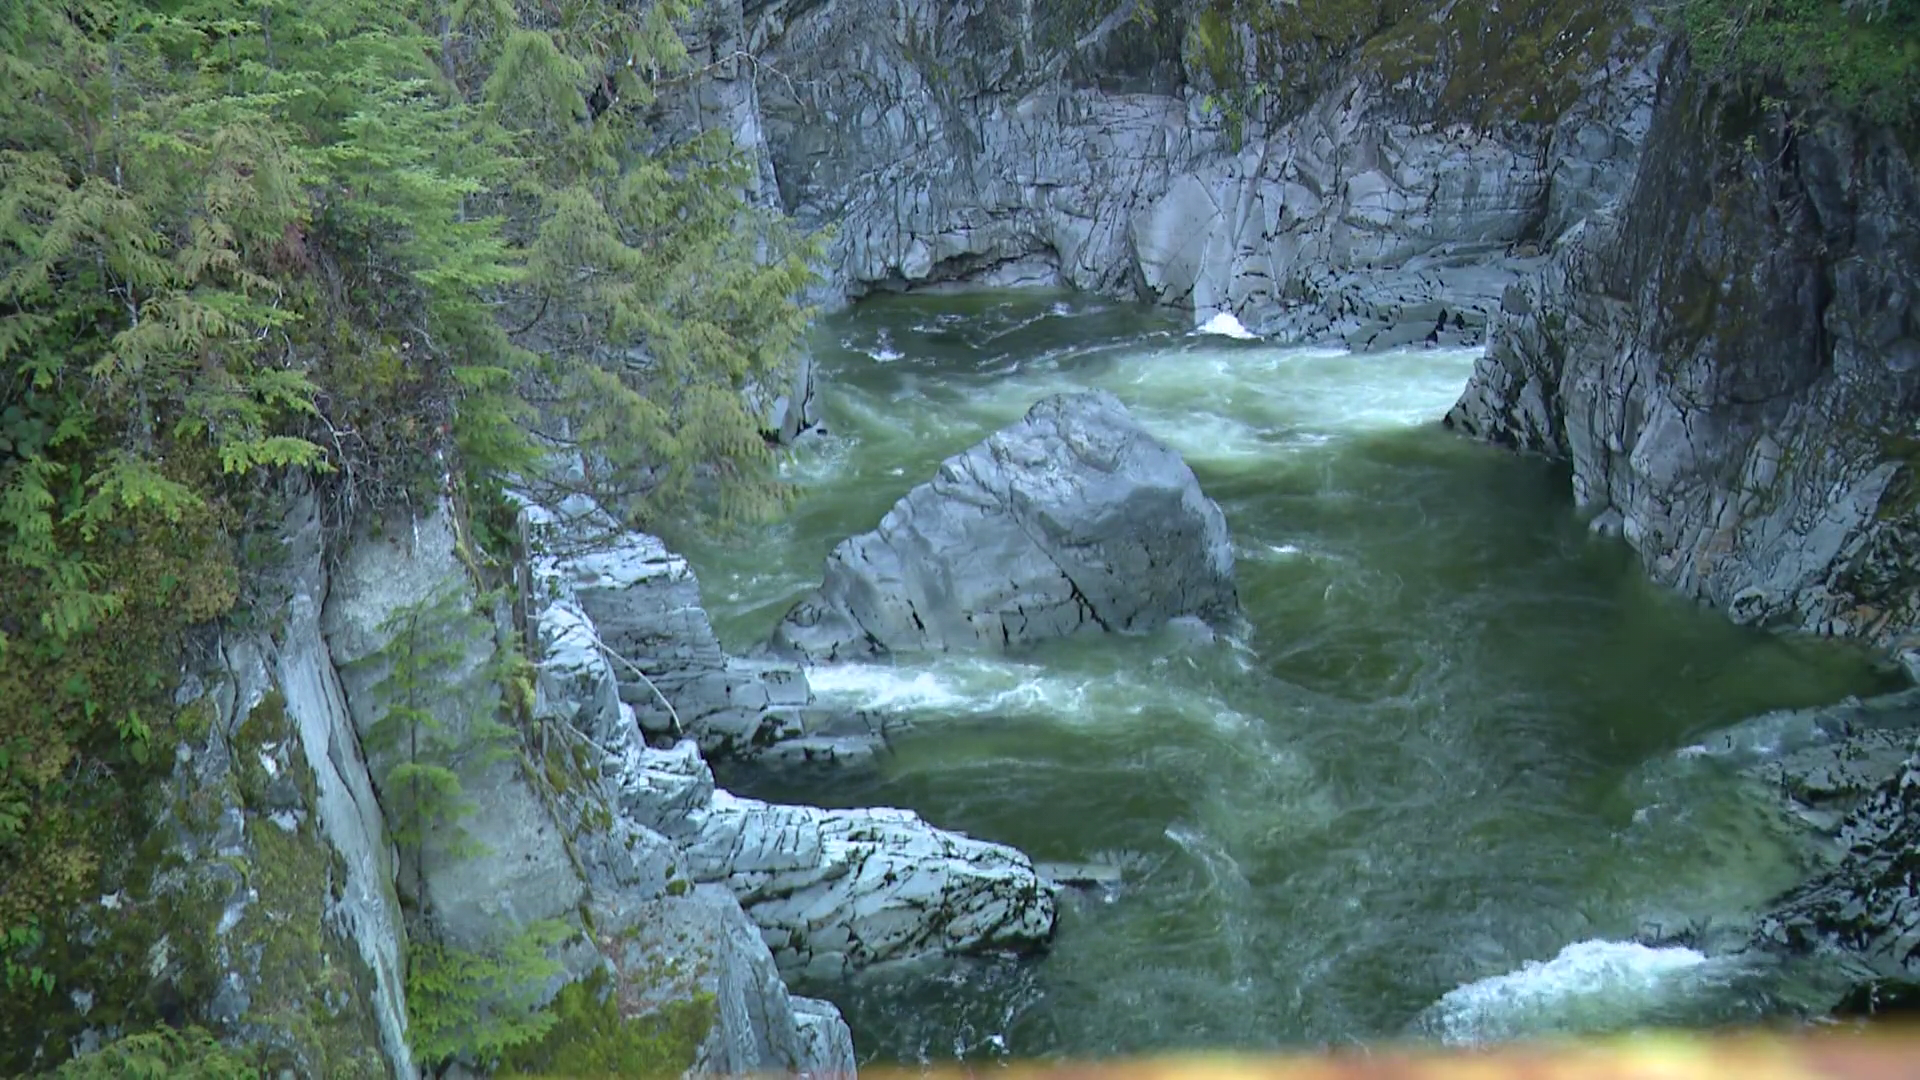 Search underway after woman swept away in Mamquam River near Squamish, B.C.